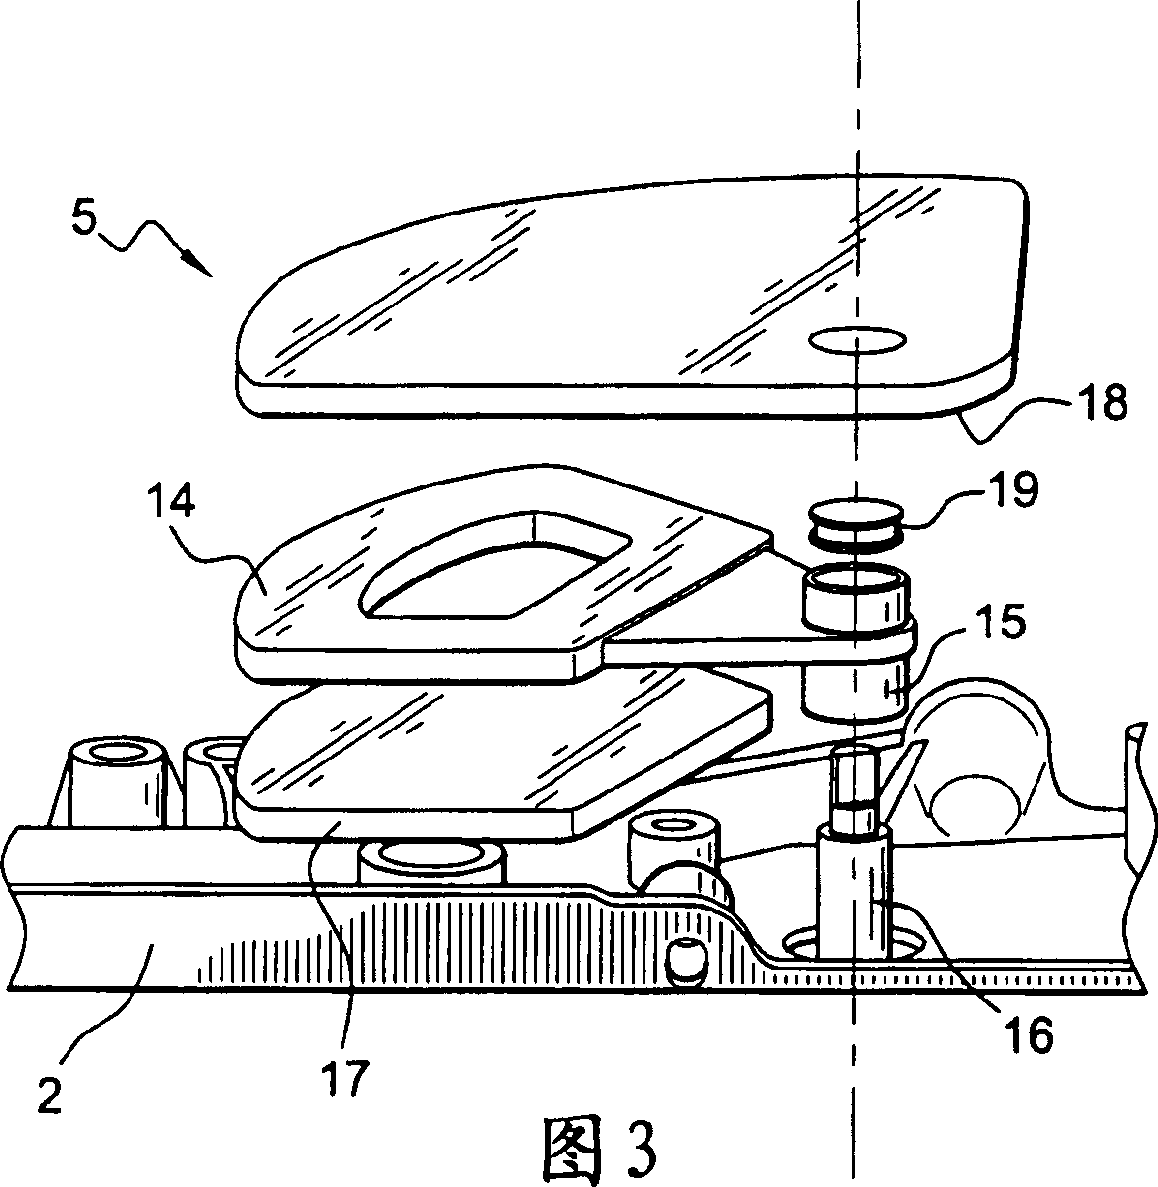 Control device of a transmission, especially for vehicles